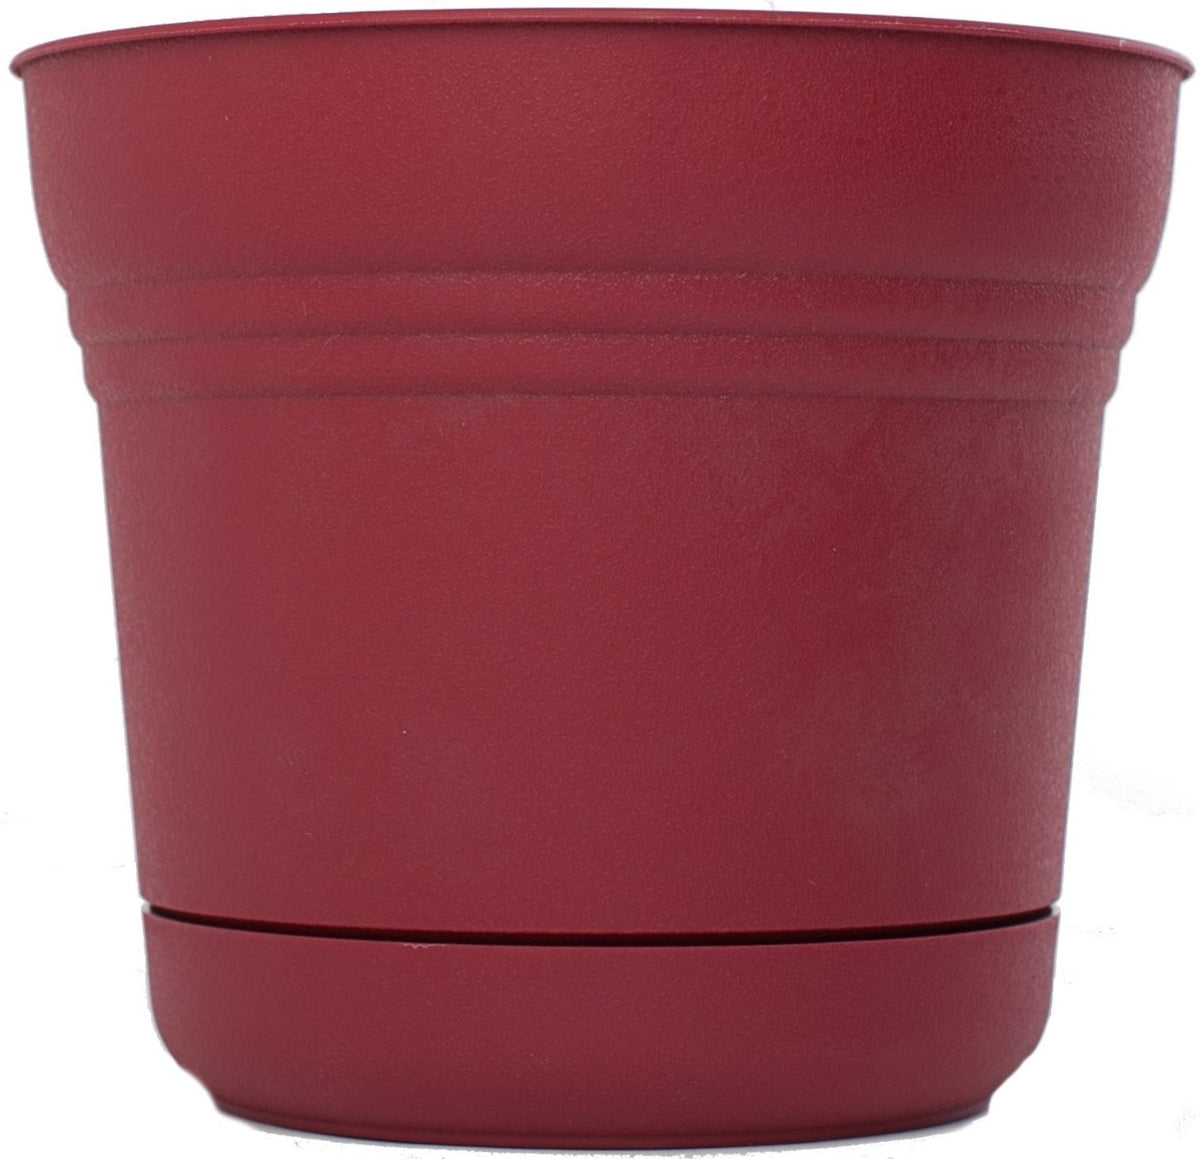 buy planters & pots at cheap rate in bulk. wholesale & retail garden supplies & fencing store.